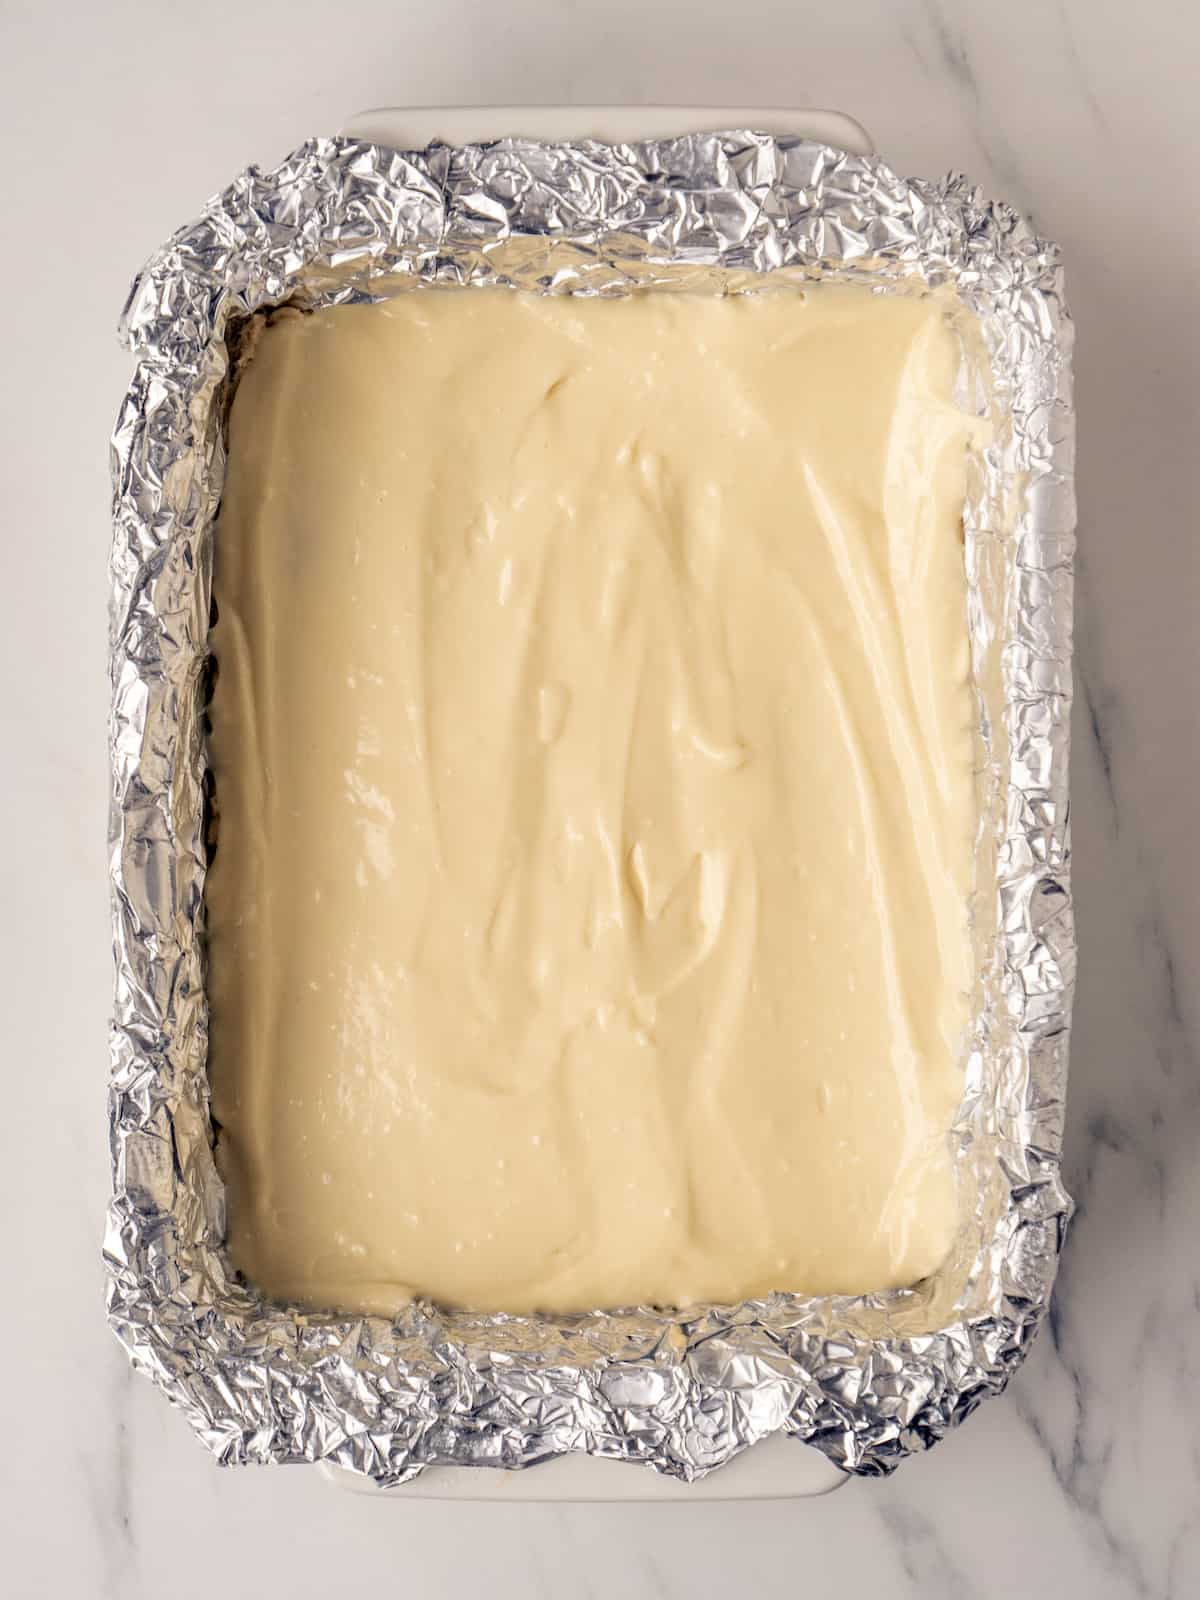 A 9x13 baking pan lined with tin foil with cookie dough pressed into the bottom of the pan that has a layer of the cheesecake mixture evenly spread on top of it.